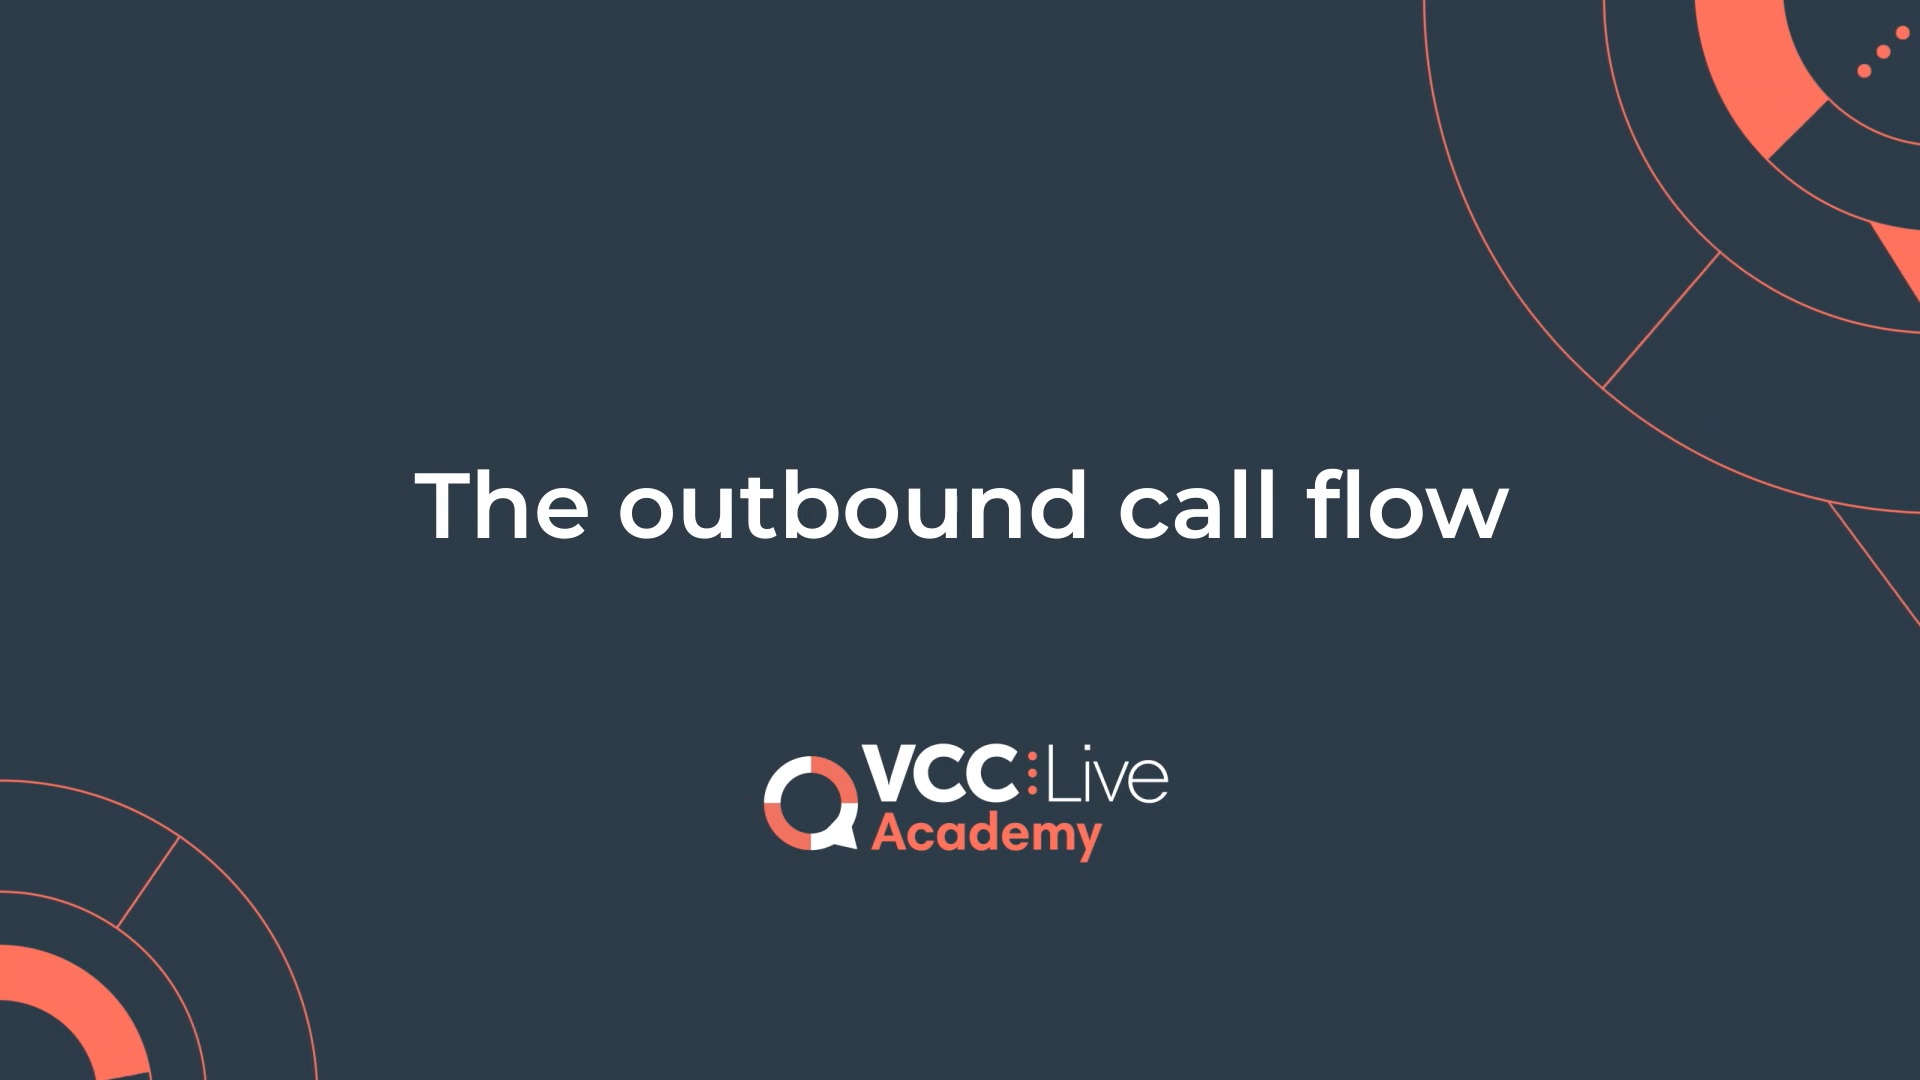 https://vcc.live/wp-content/uploads/2022/07/dialer-course-outbound-call-flow.jpg